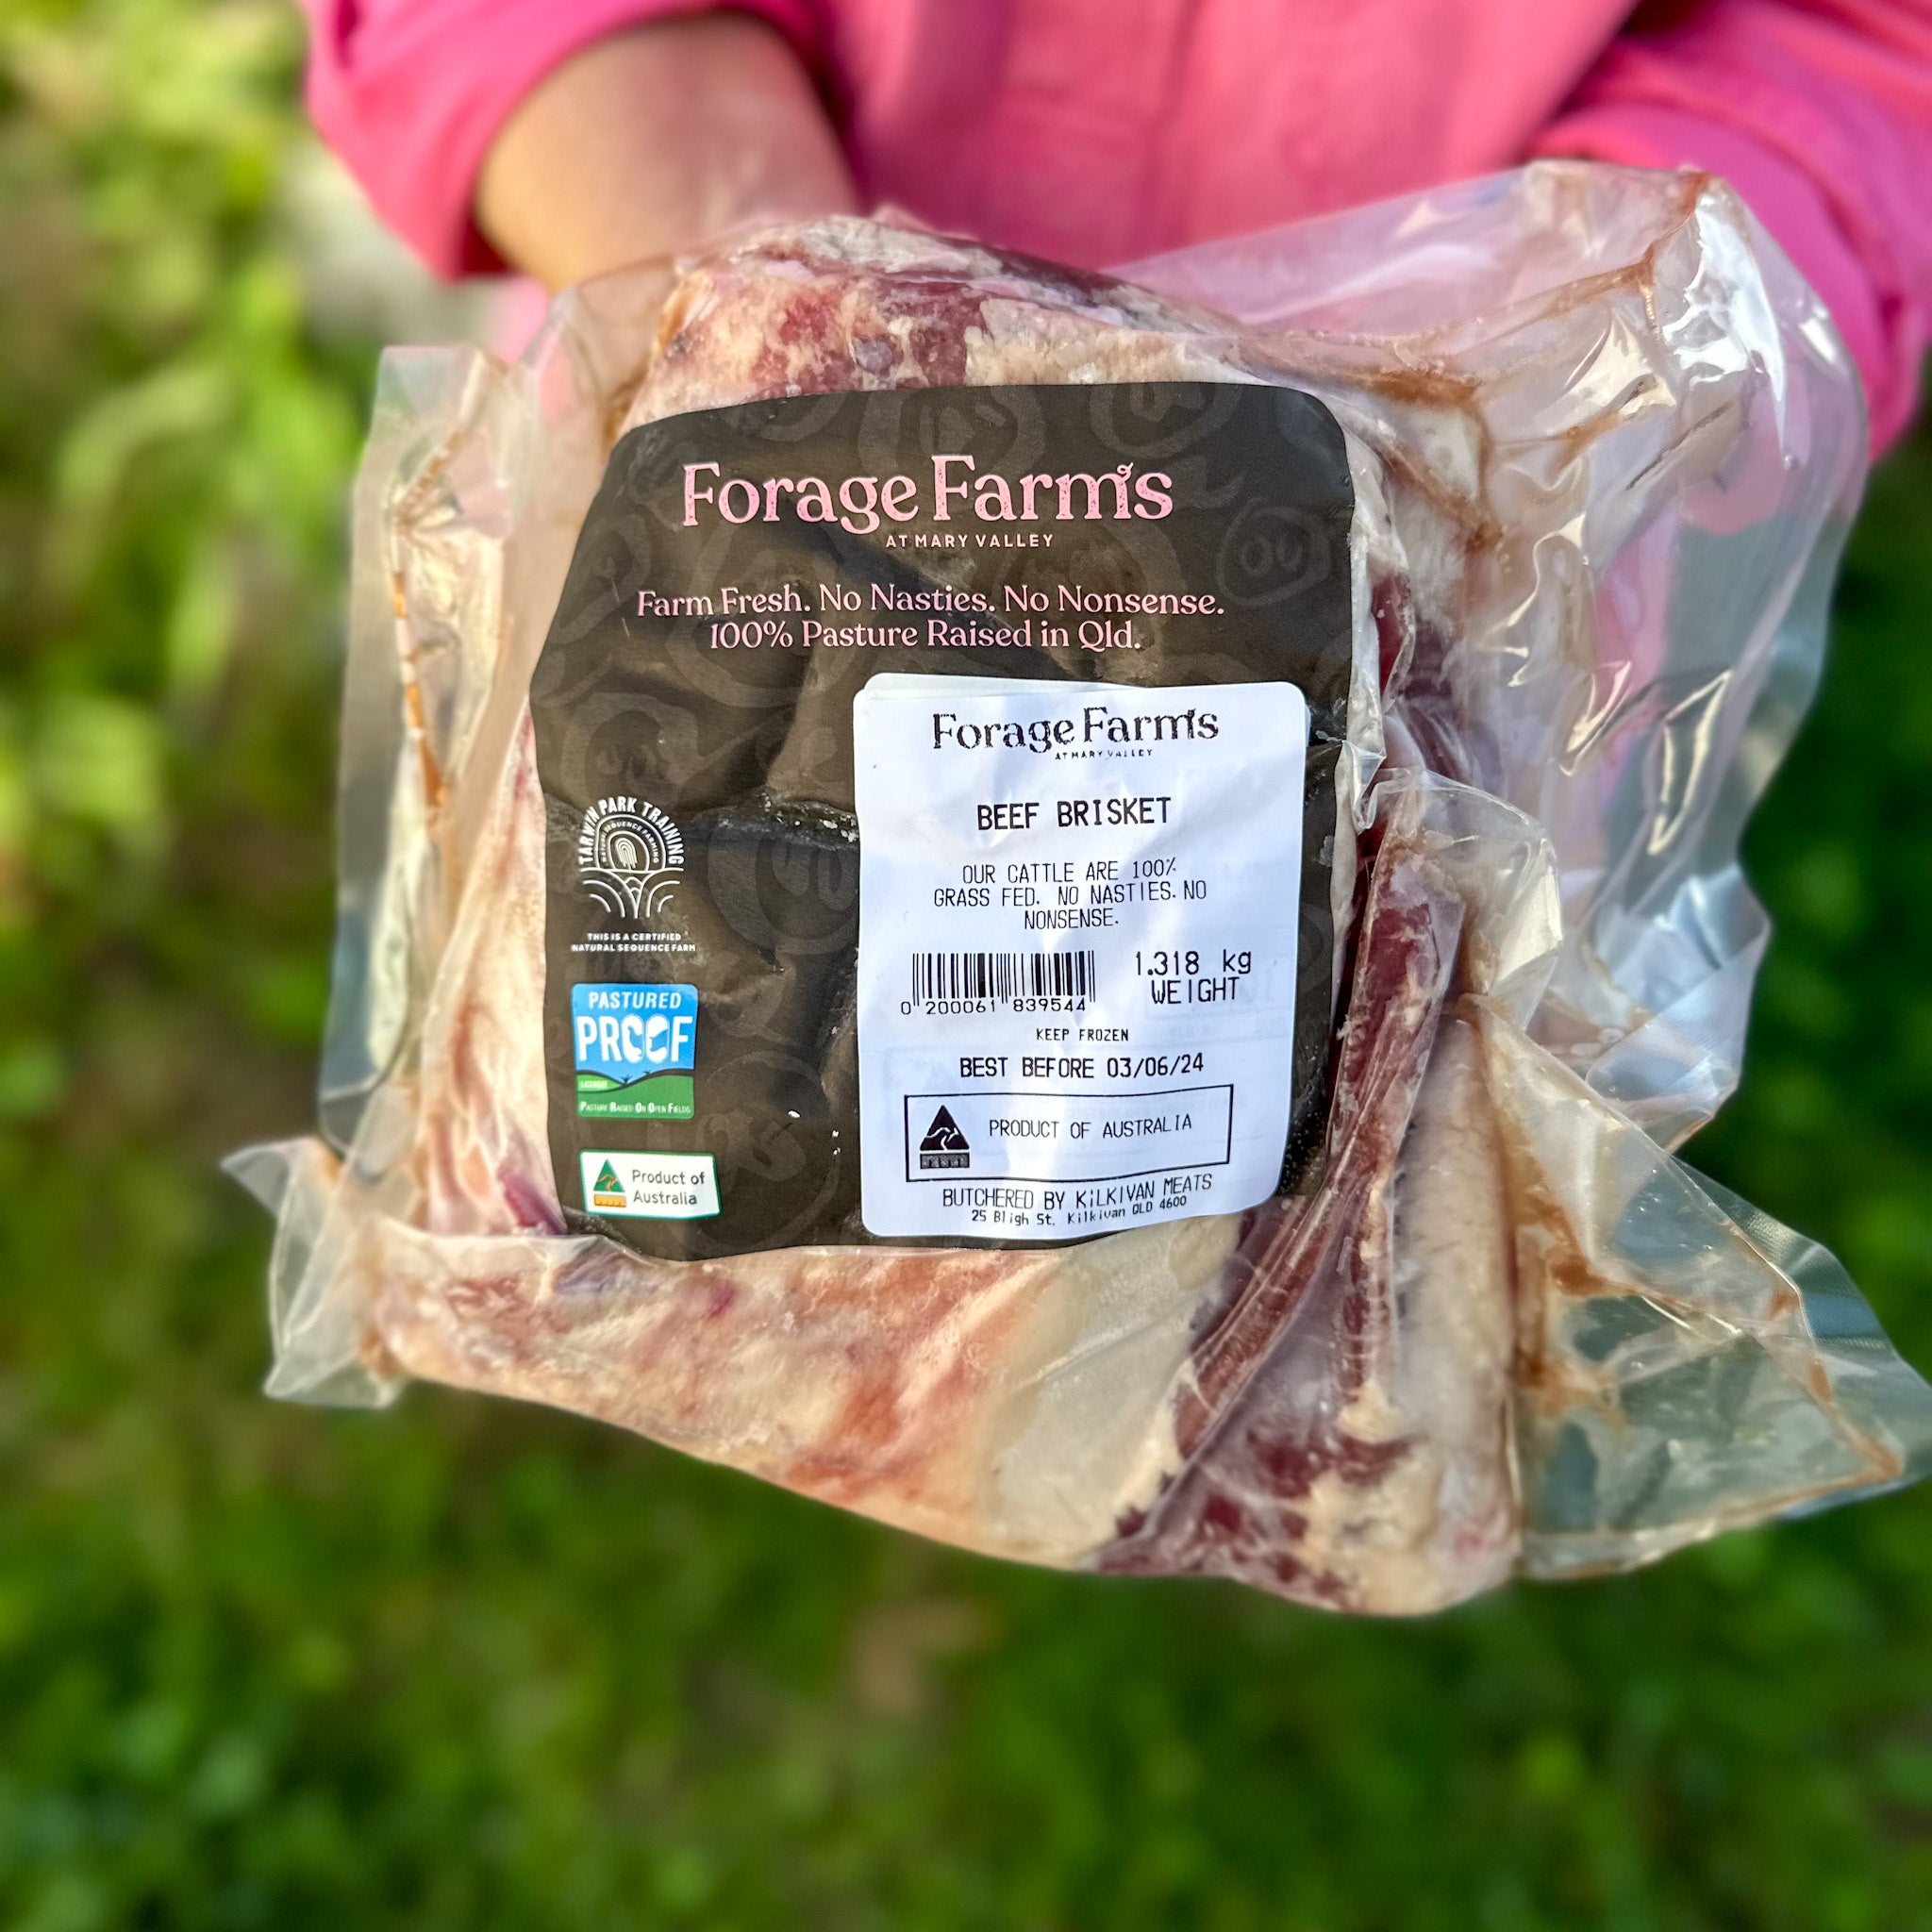 Forage Farms Grass Fed & Finished Beef Brisket